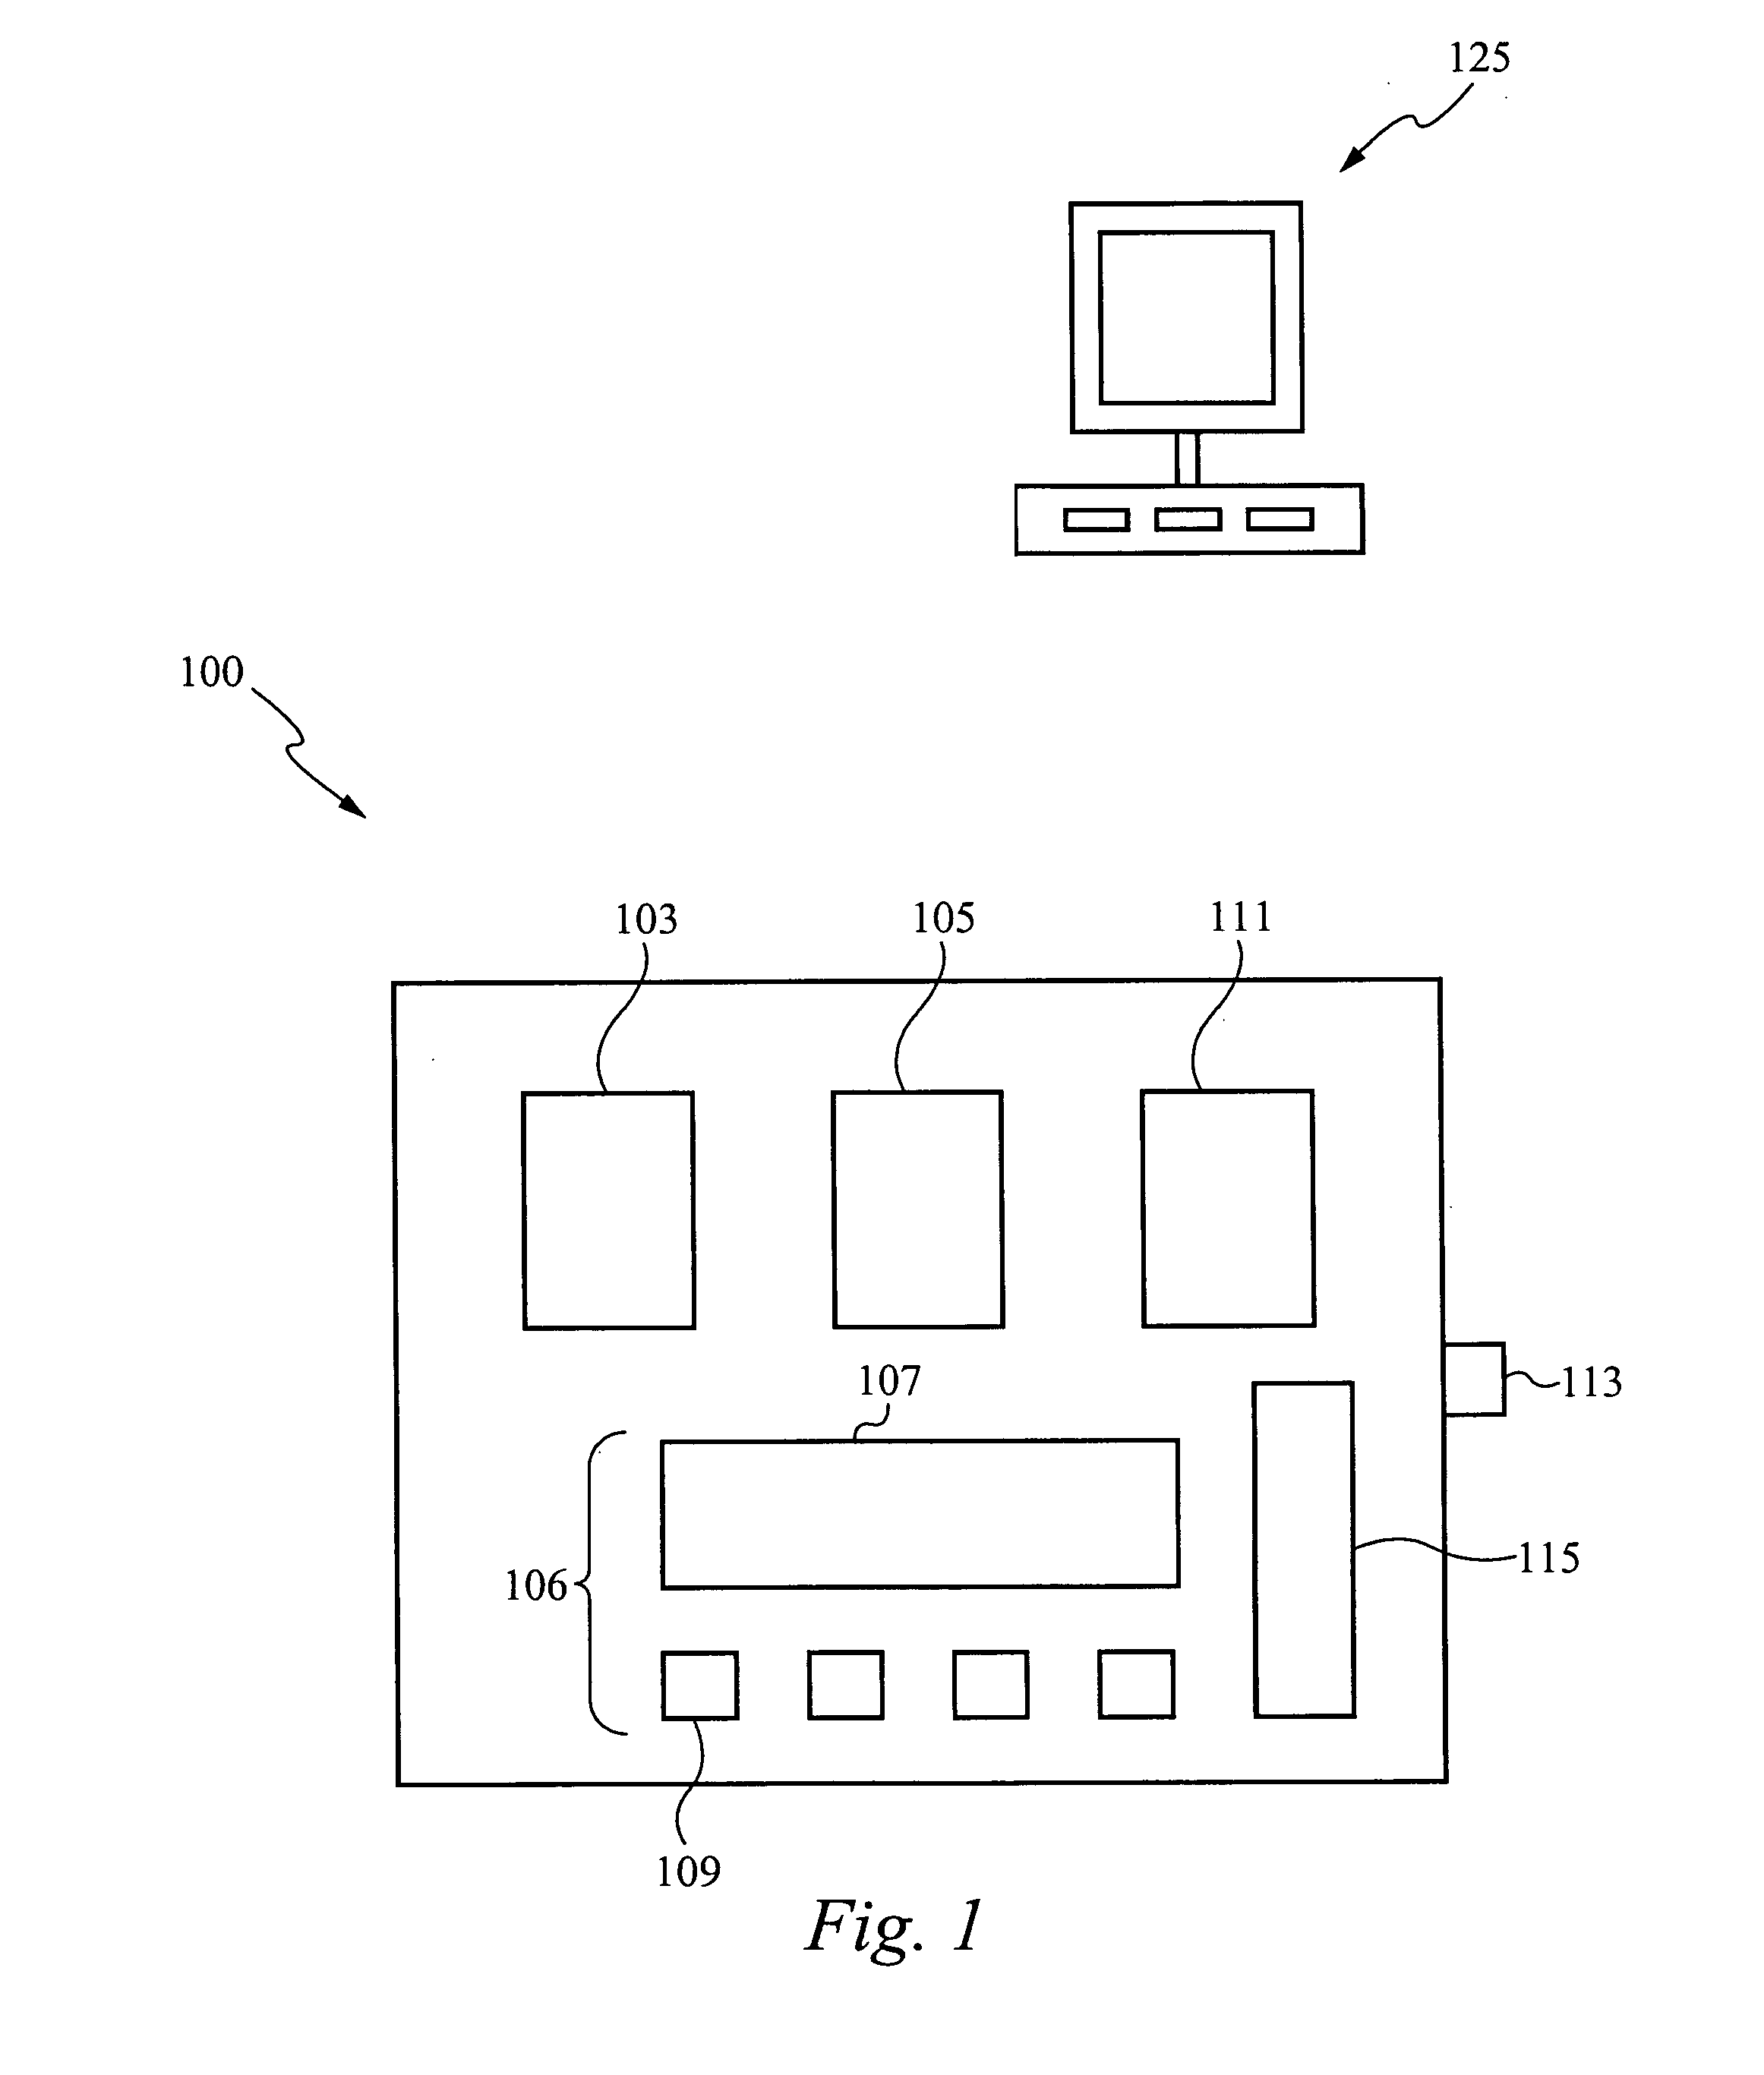 Daylight control system device and method